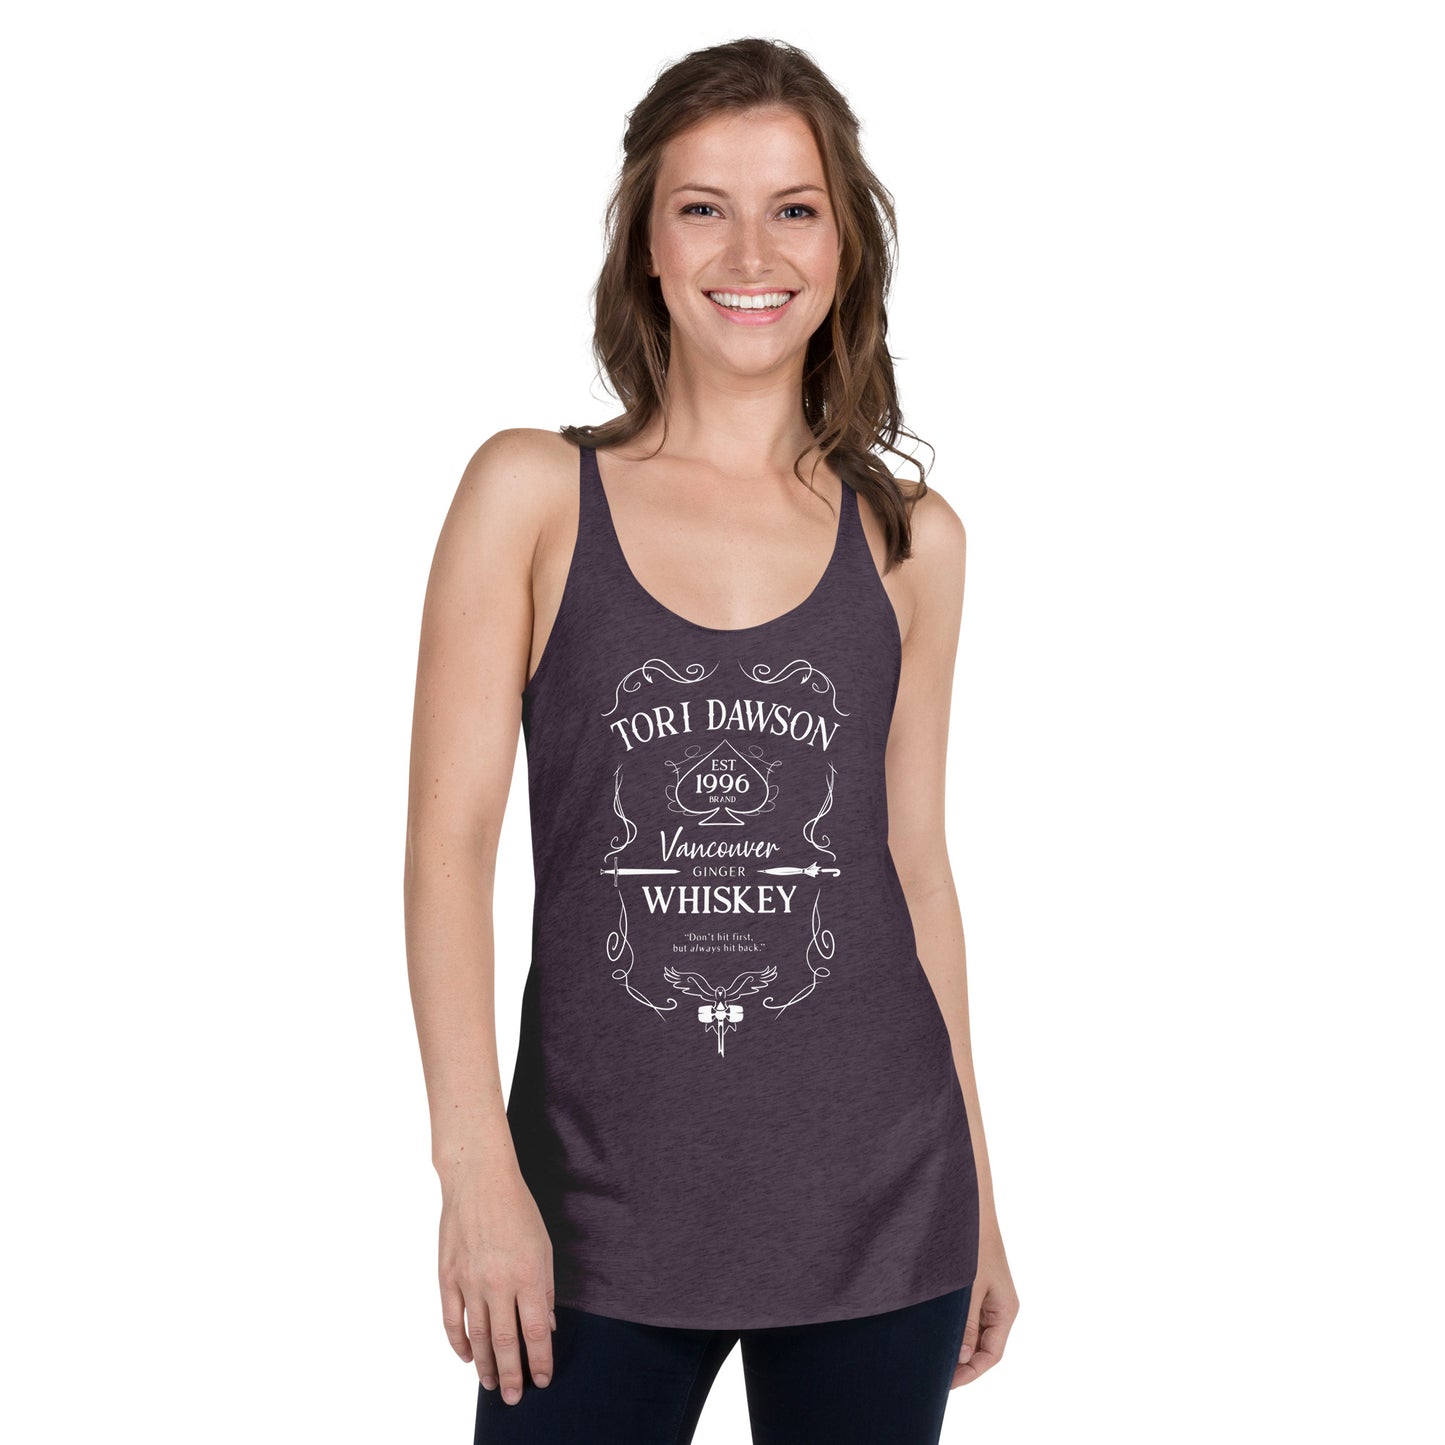 "Ginger Whiskey" Ladies' Racerback Tank (The Guild Codex)